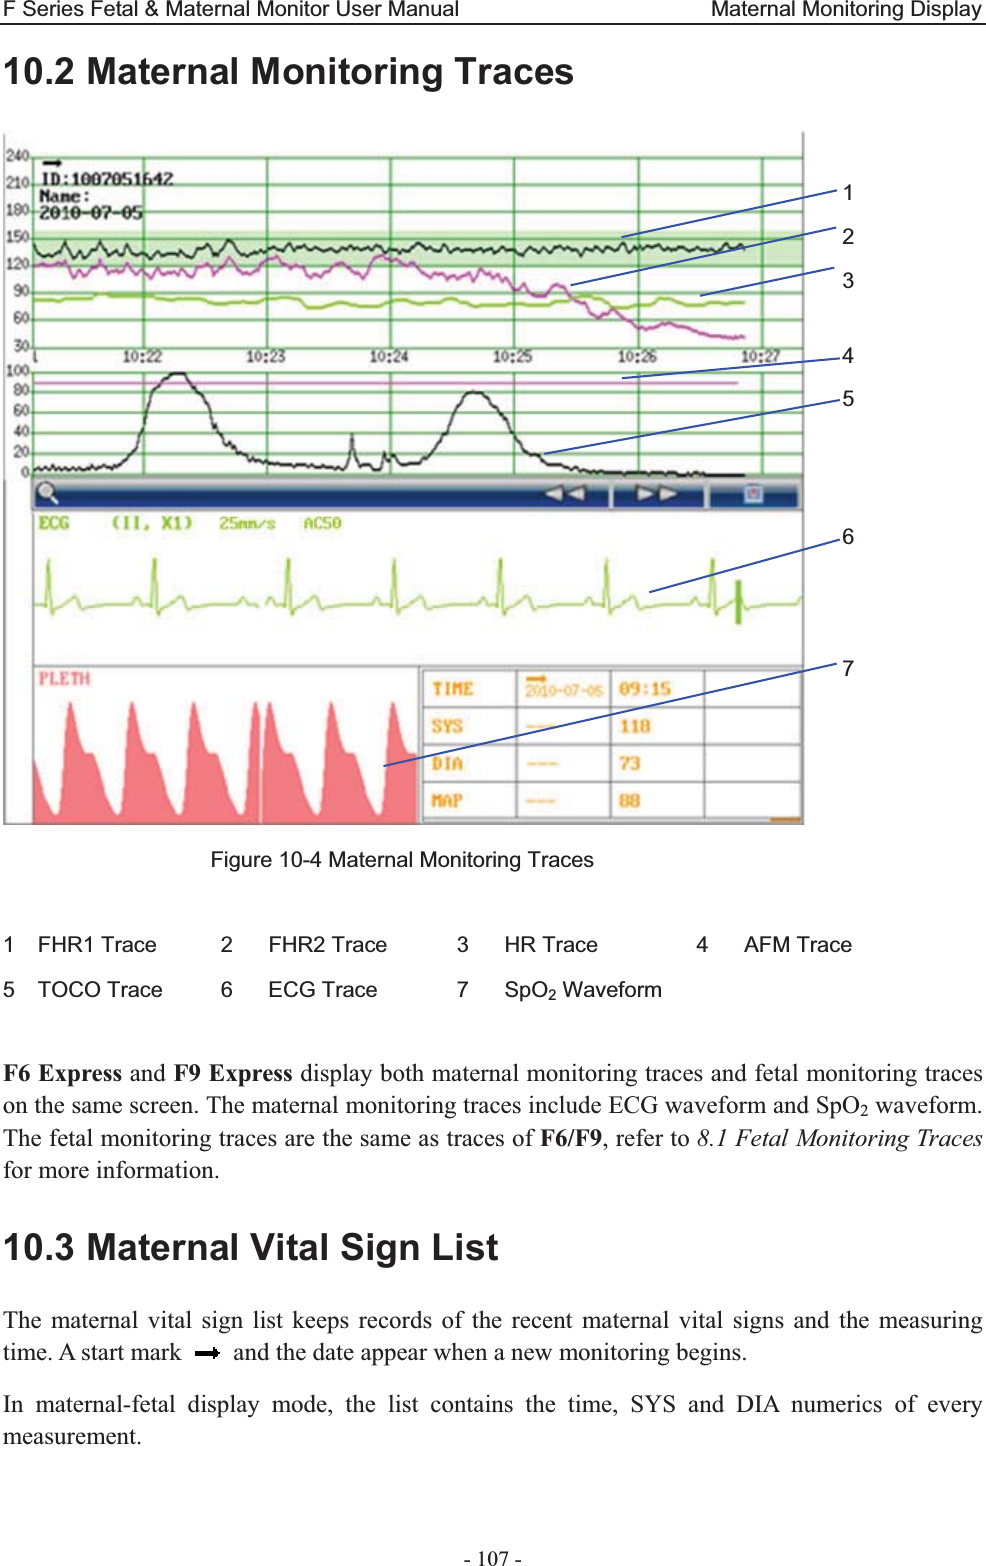 F Series Fetal &amp; Maternal Monitor User Manual                       Maternal Monitoring Display - 107 - 10.2 Maternal Monitoring Traces  Figure 10-4 Maternal Monitoring Traces  1  FHR1 Trace  2  FHR2 Trace  3  HR Trace  4  AFM Trace 5  TOCO Trace  6  ECG Trace  7  SpO2 Waveform      F6 Express and F9 Express display both maternal monitoring traces and fetal monitoring traces on the same screen. The maternal monitoring traces include ECG waveform and SpO2 waveform. The fetal monitoring traces are the same as traces of F6/F9, refer to 8.1 Fetal Monitoring Traces for more information. 10.3 Maternal Vital Sign List The maternal vital sign list keeps records of the recent maternal vital signs and the measuring time. A start mark    and the date appear when a new monitoring begins. In maternal-fetal display mode, the list contains the time, SYS and DIA numerics of every measurement. 1 2 3 4 5   6  7 